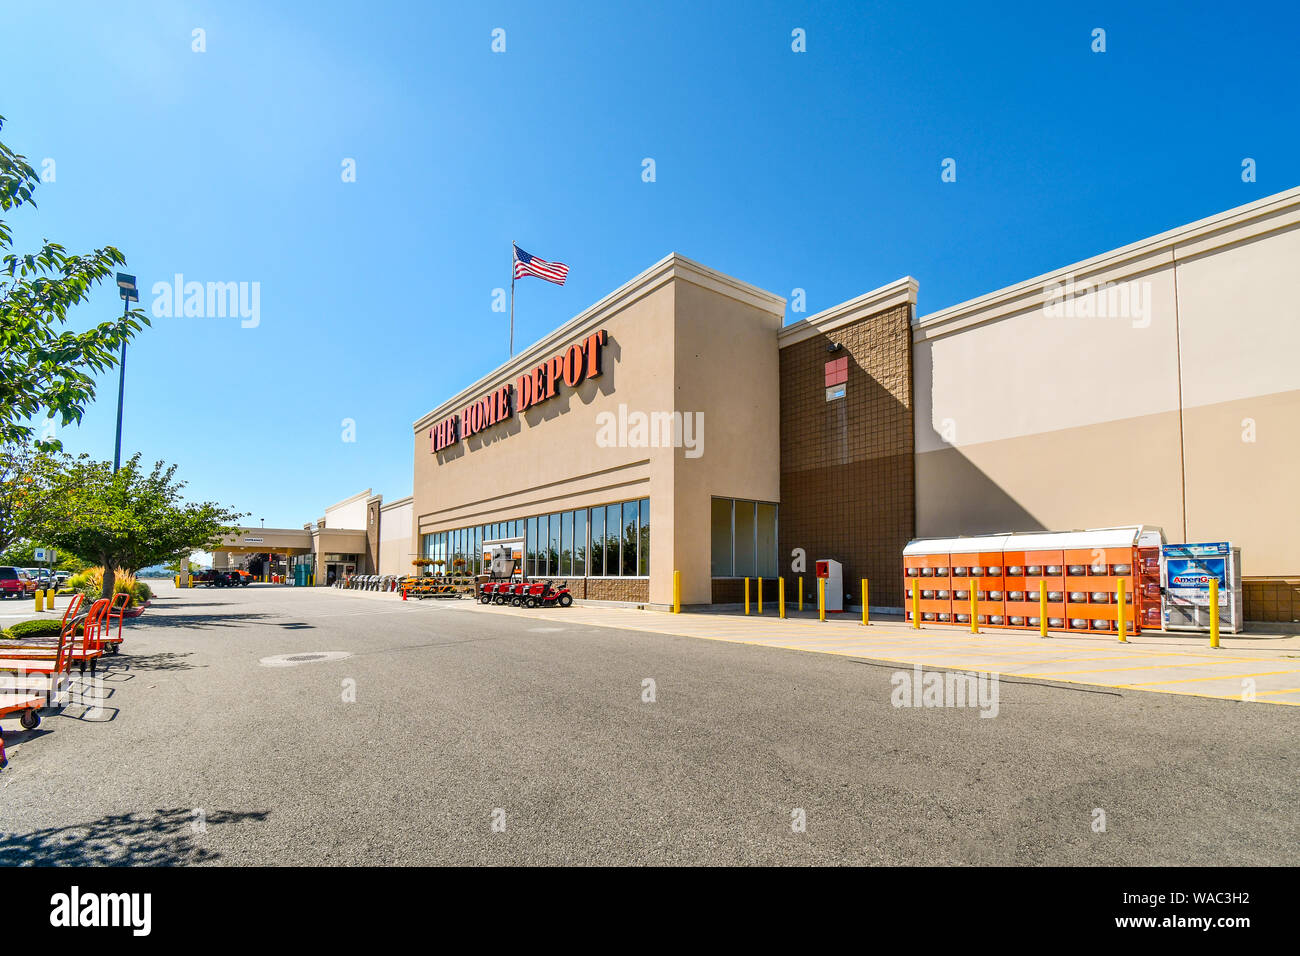 Home Depot Location flying the American flag. Home Depot is the Largest Home Improvement Retailer in the US Stock Photo